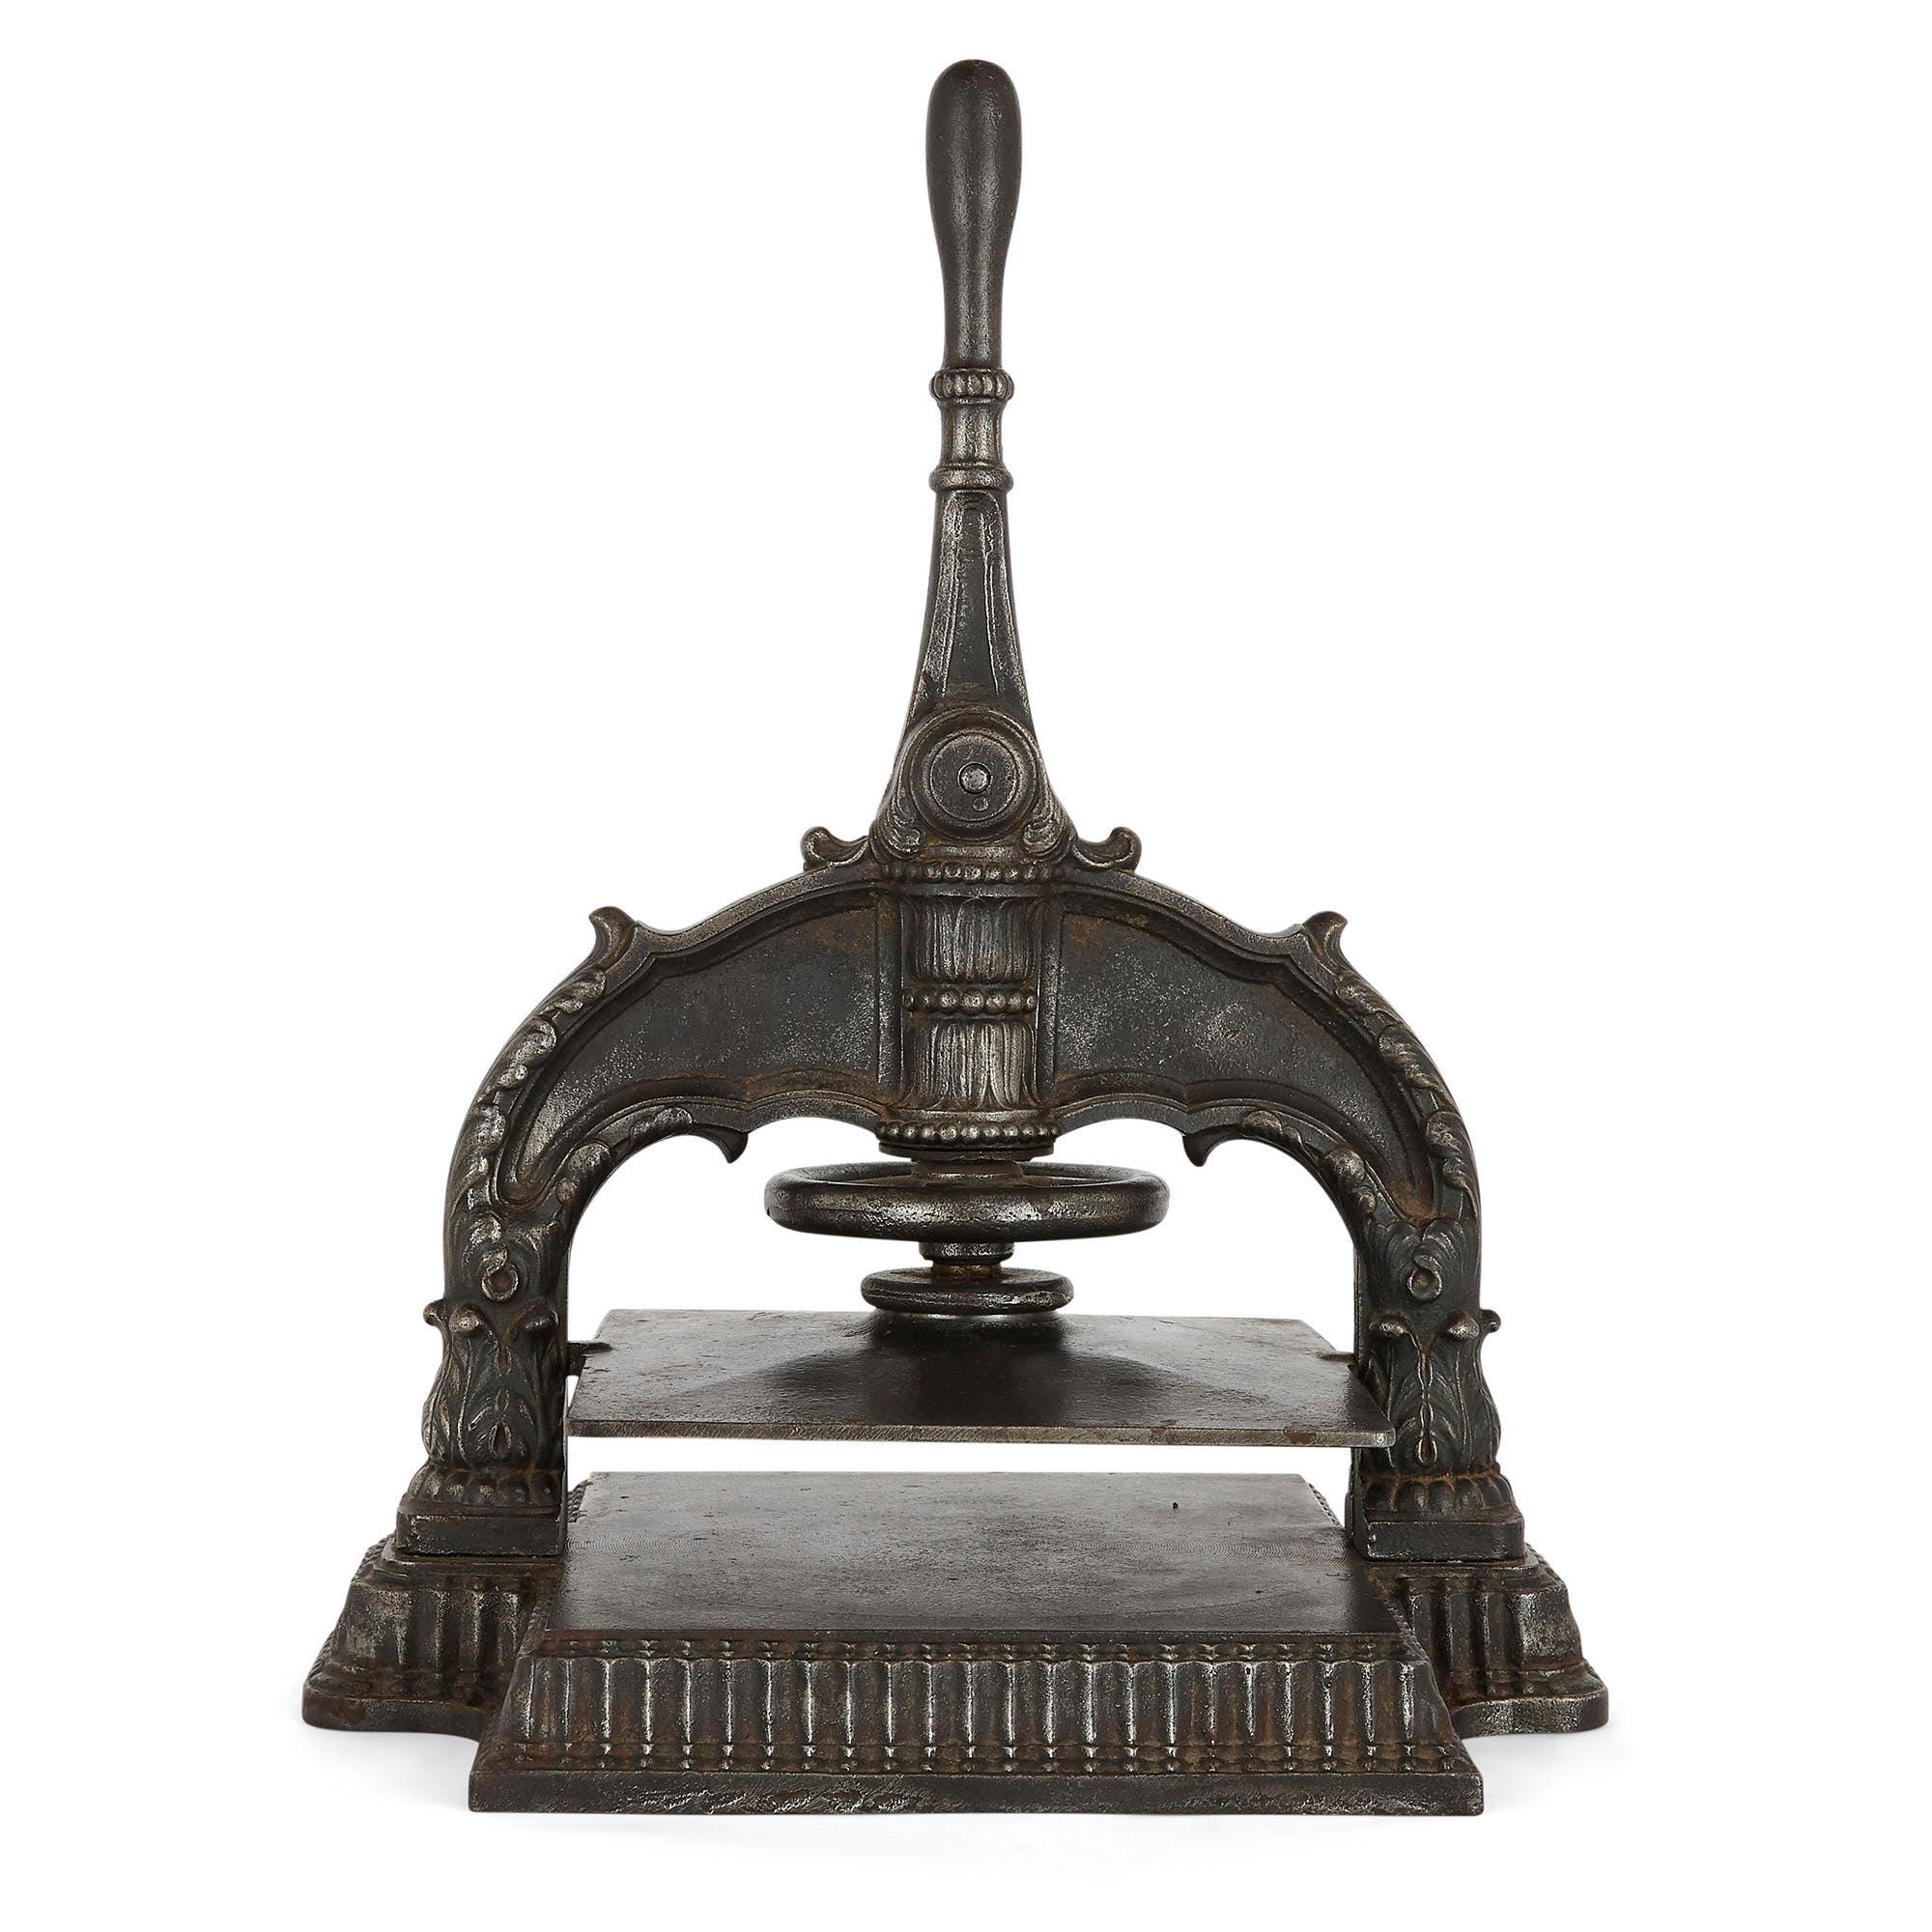 Antique 19th century French cast iron book press
French, 19th century
Dimensions: Height 48cm, width 37cm, depth 32cm

Crafted from strong cast iron, this beautiful piece is a book press, used in the binding process of making books. Made in 19th